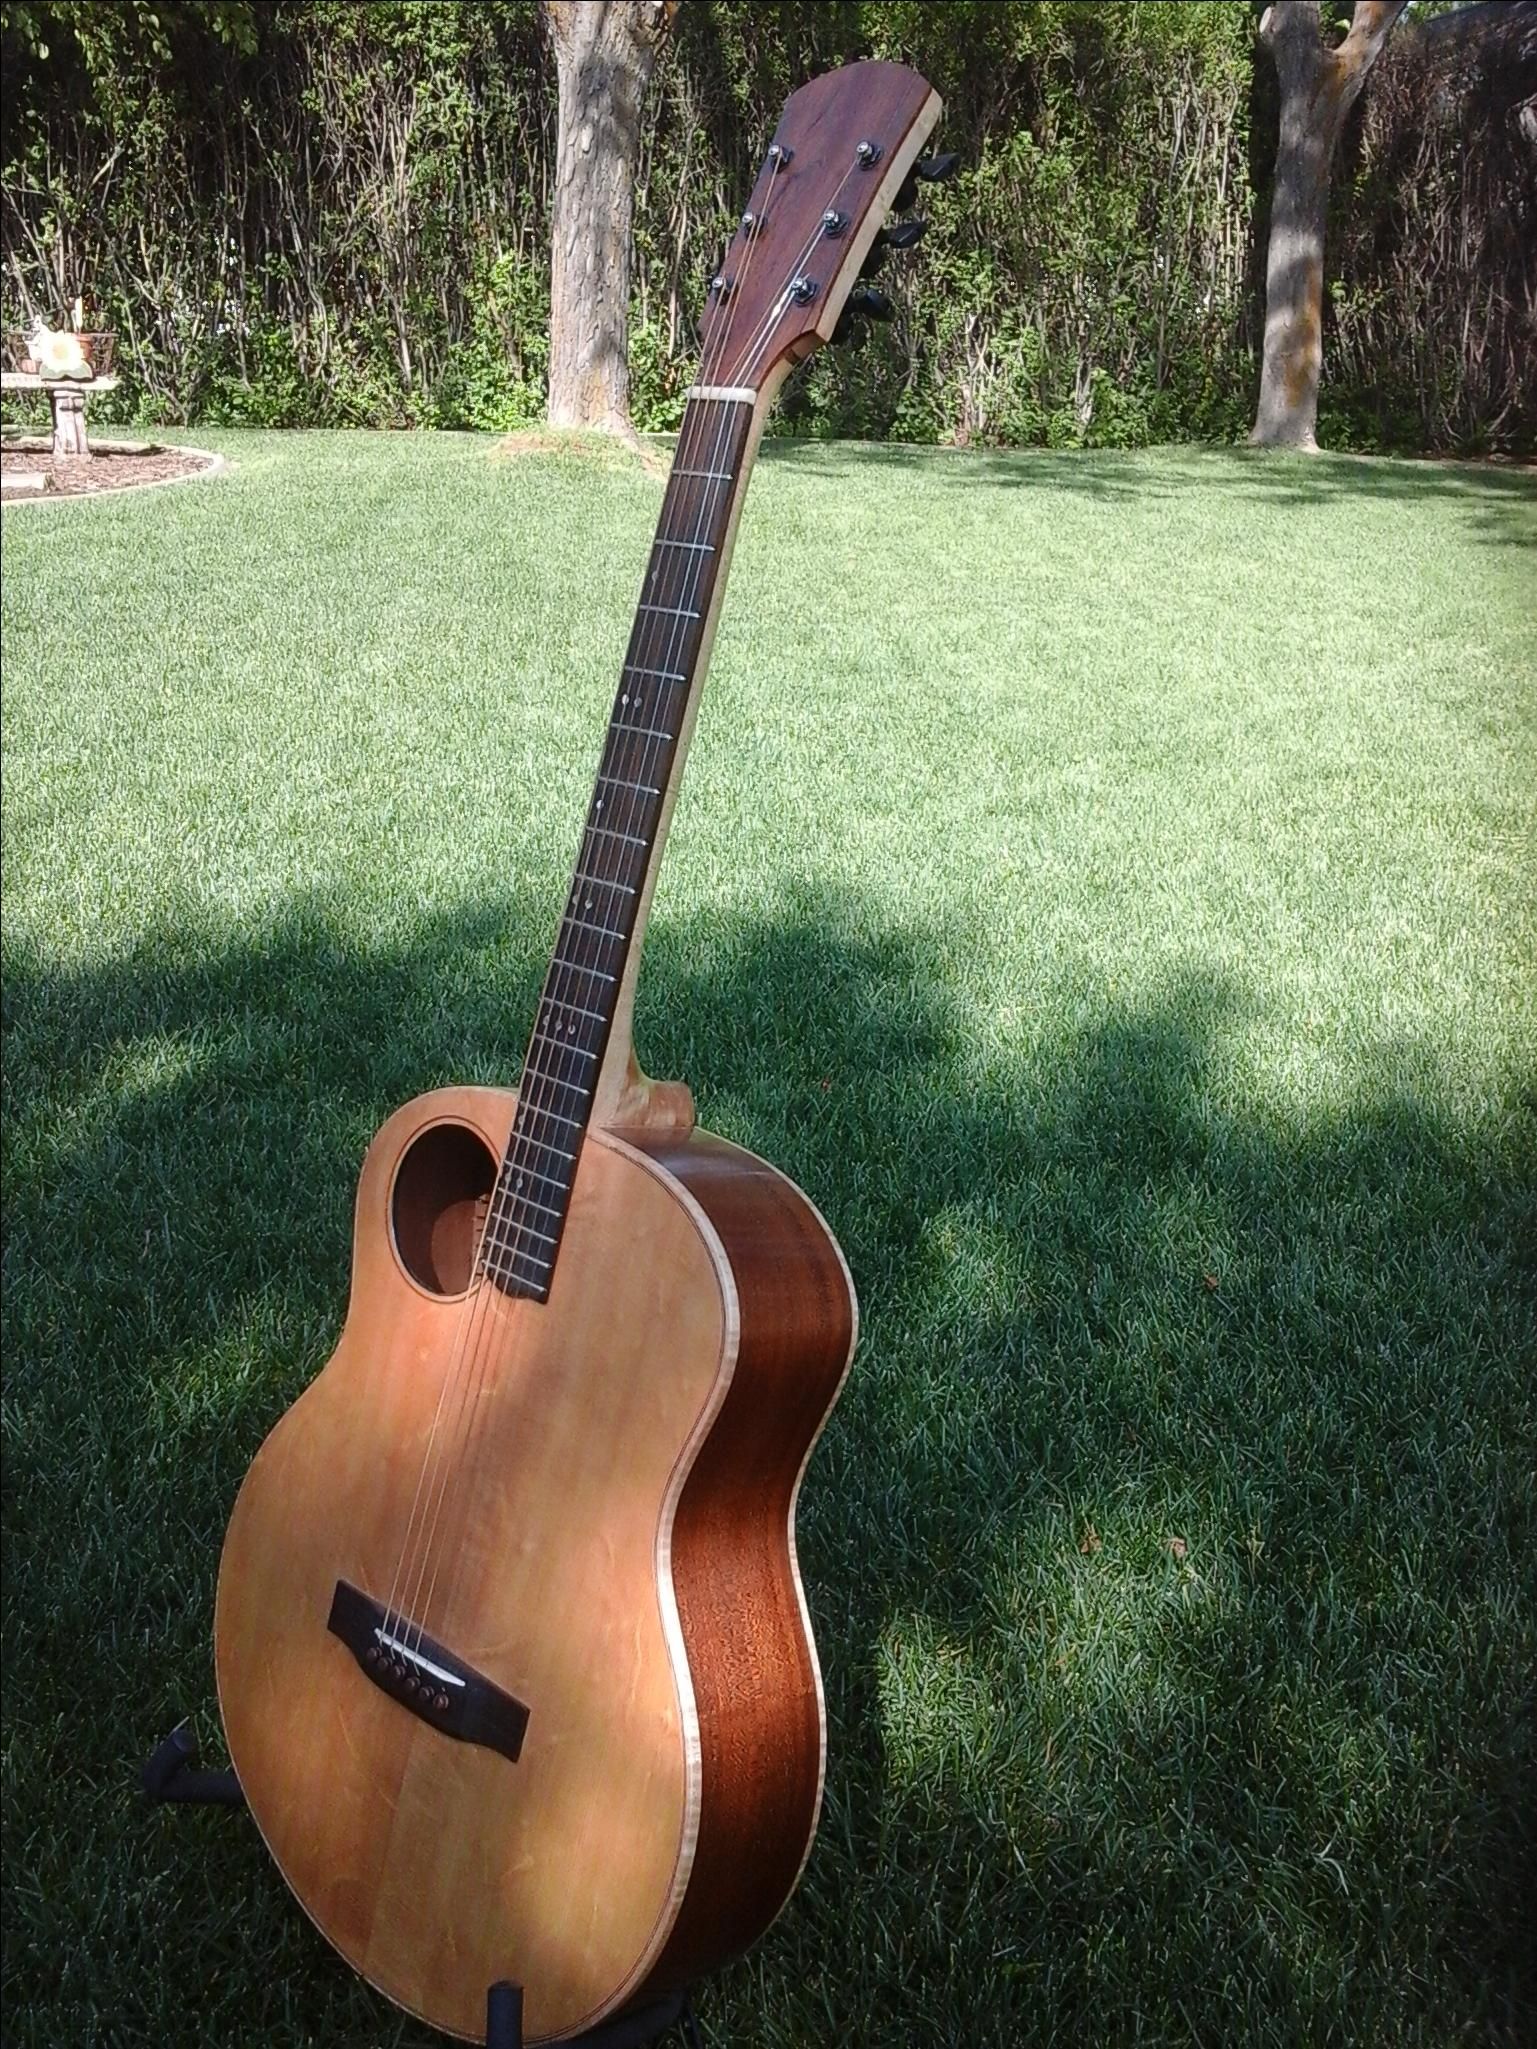 Buy Hand Made Custom Built Acoustic Guitars, made to order from RC